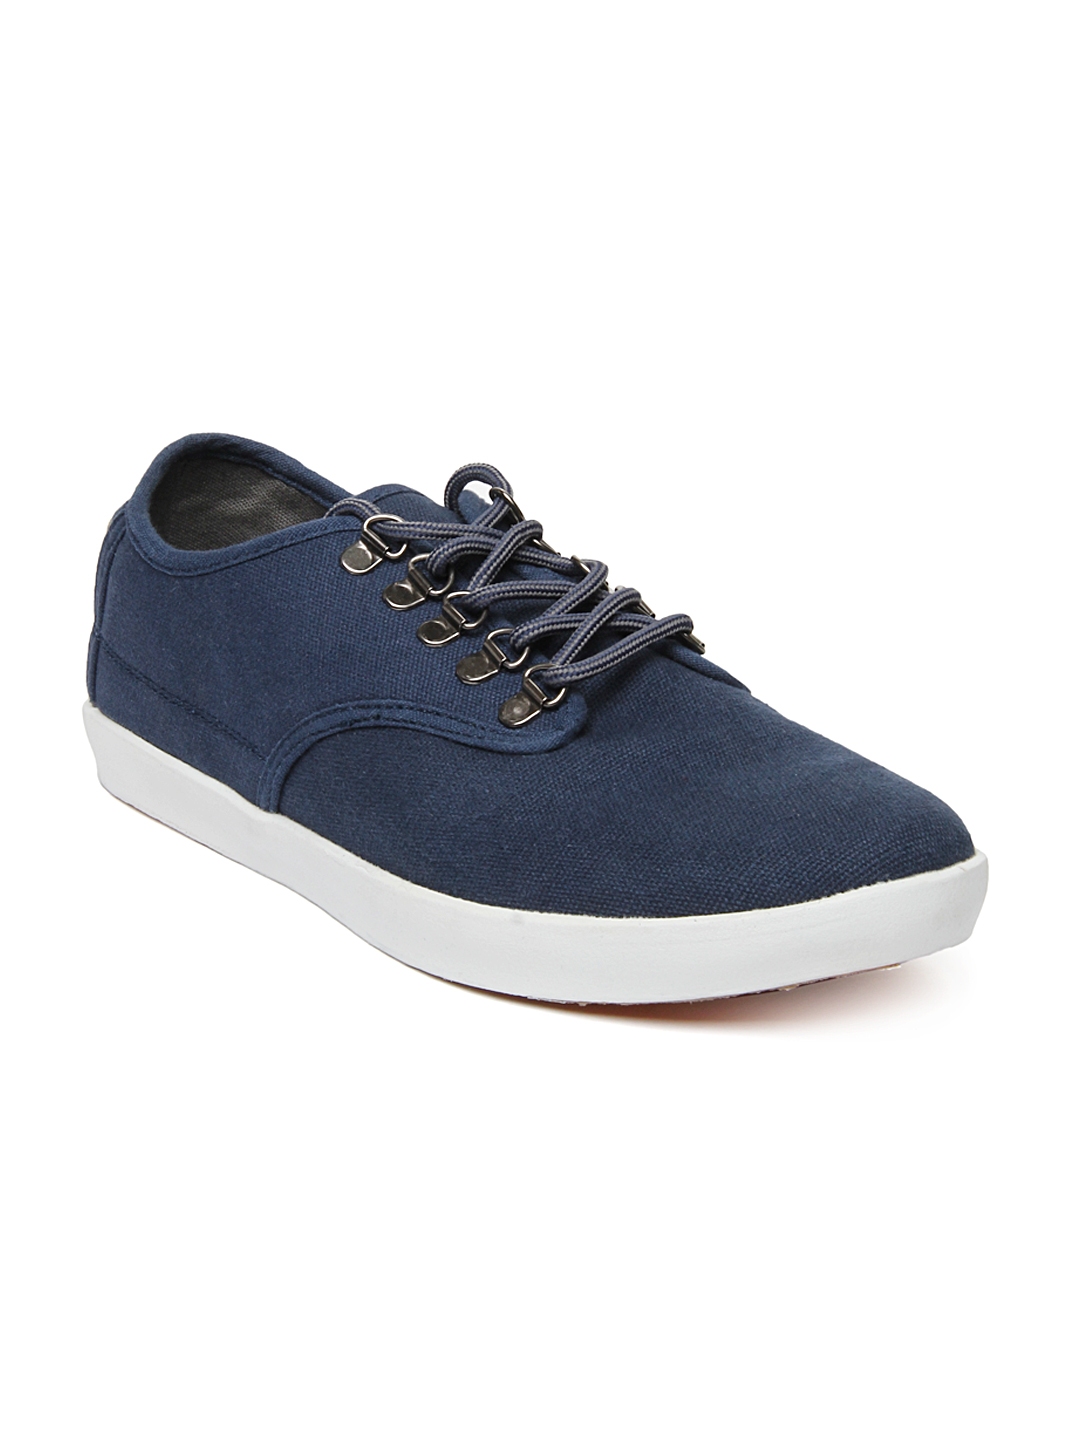 Buy Roadster Men Blue Casual Shoes - Casual Shoes for Men 582061 | Myntra